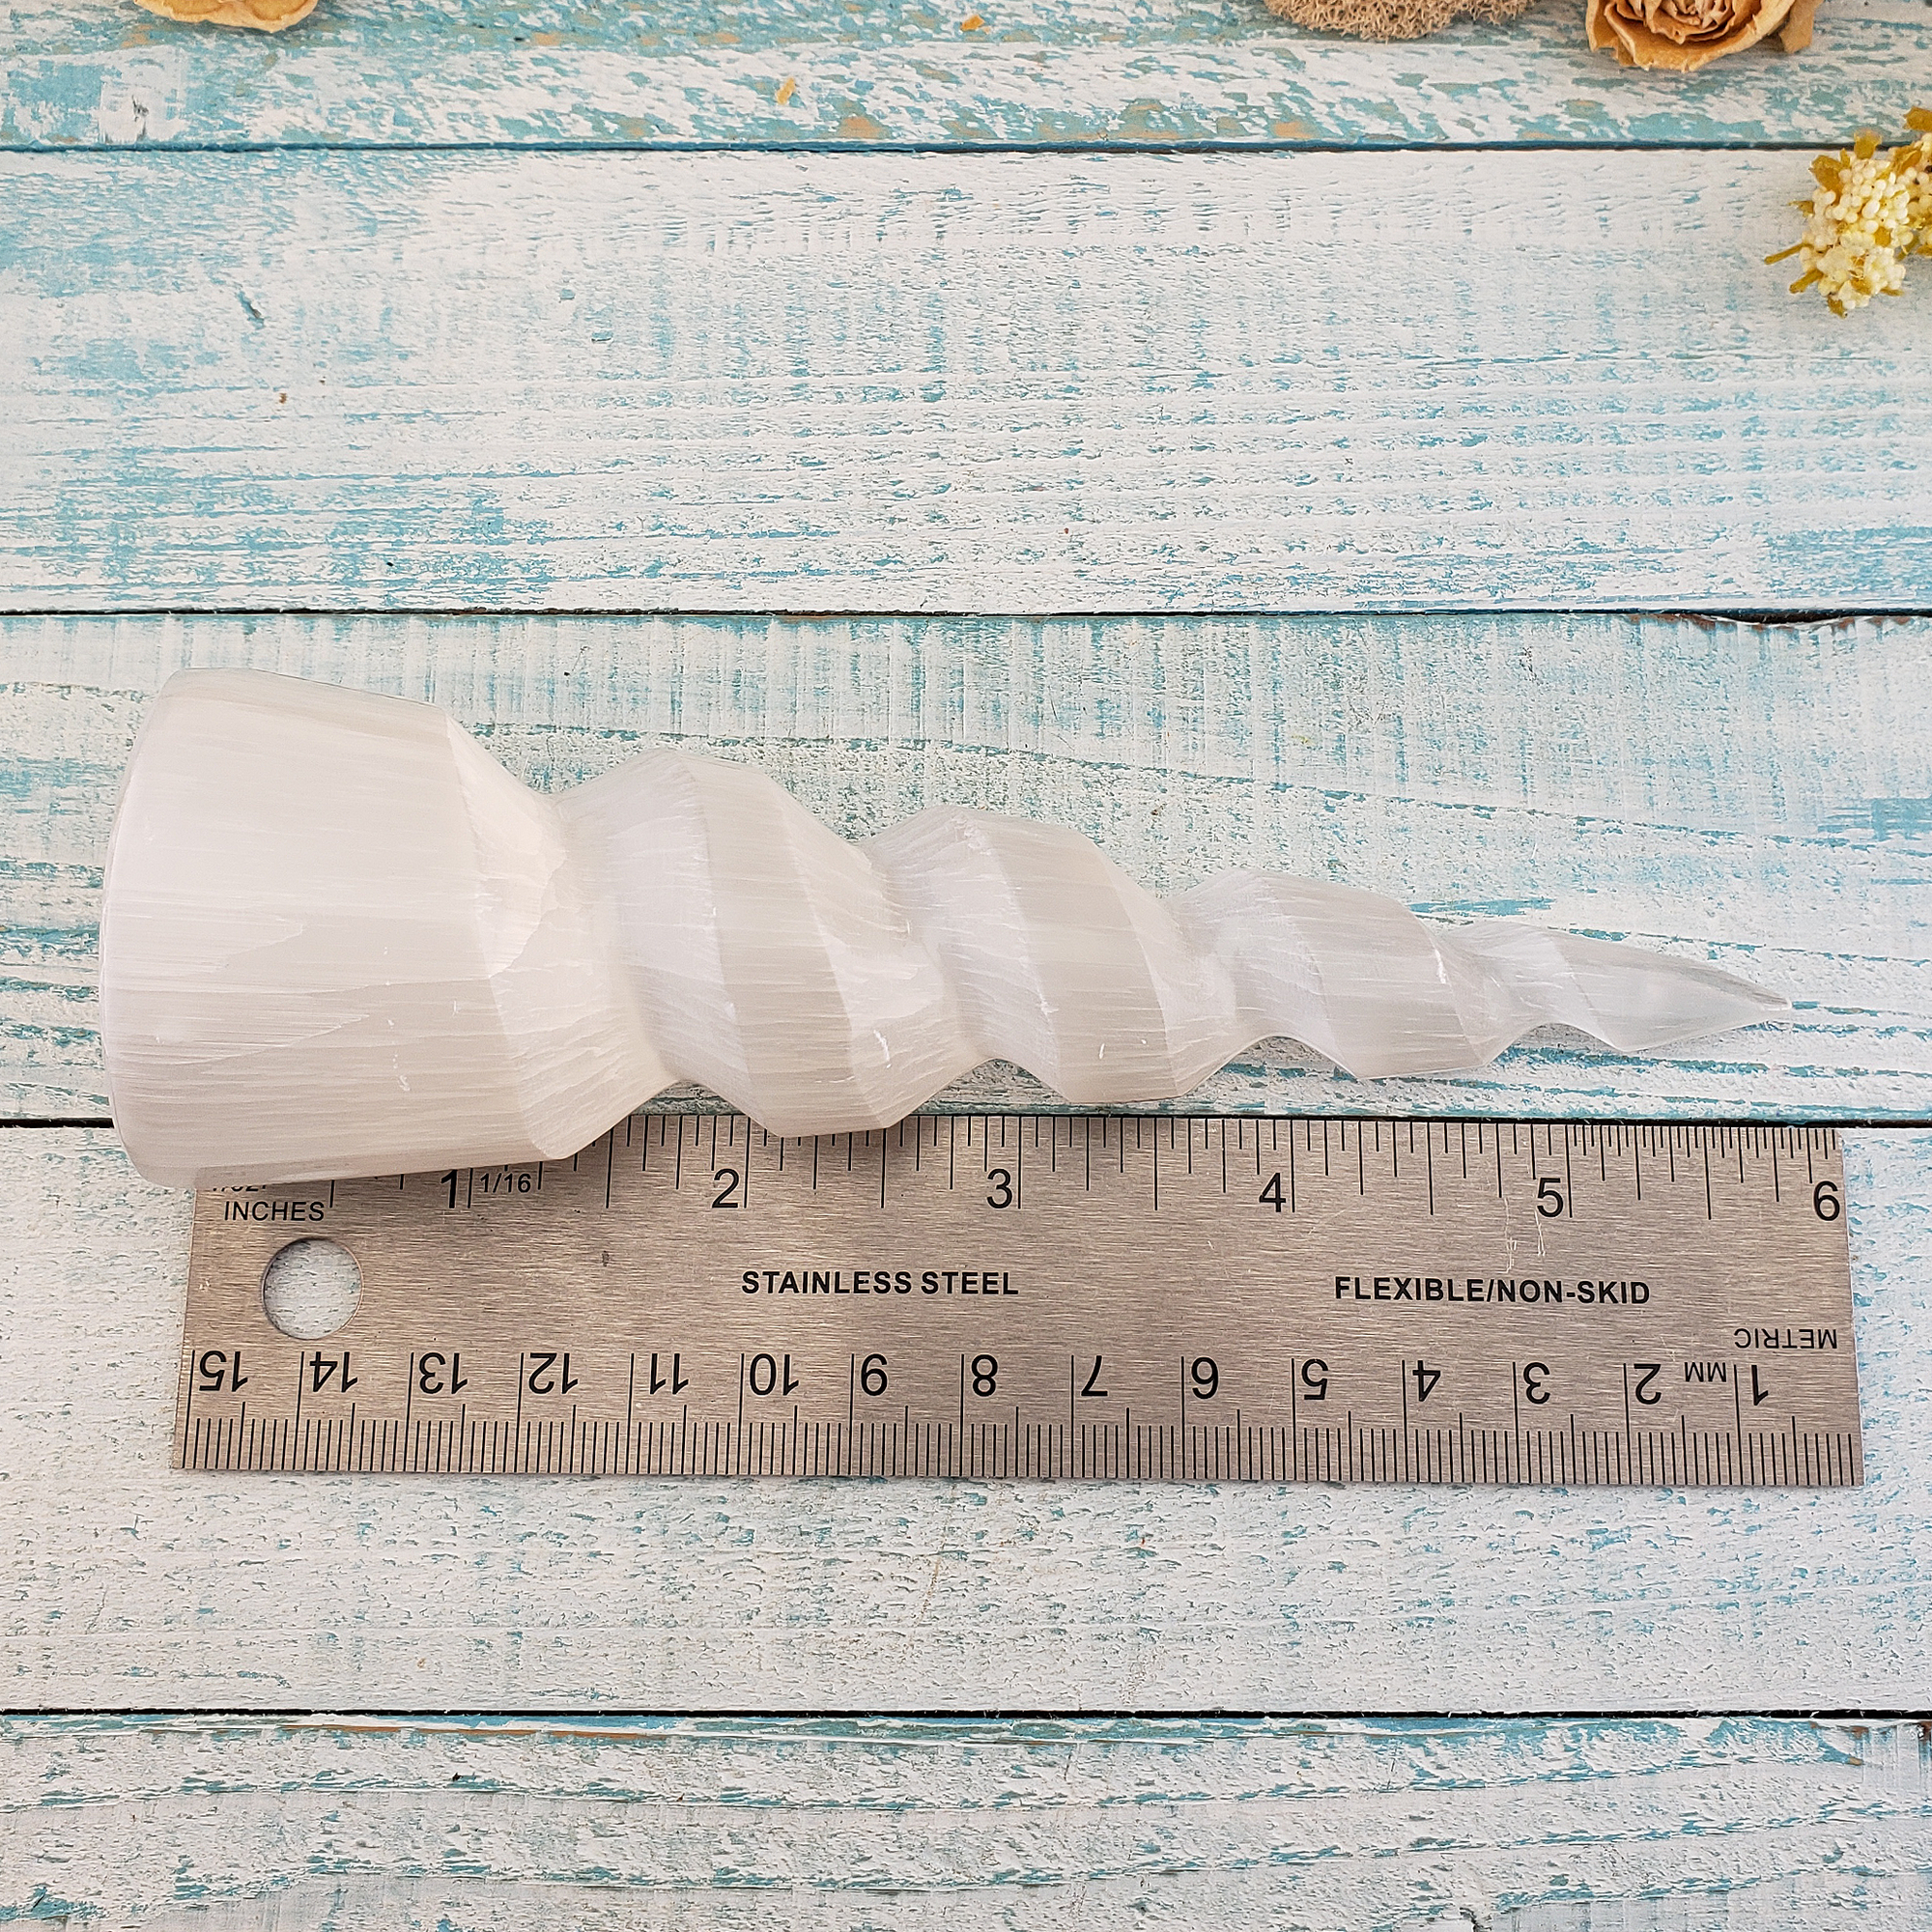 White Selenite Unicorn Horn Spiral Crystal Tower - One 5.5 Inch Tower - Measurement